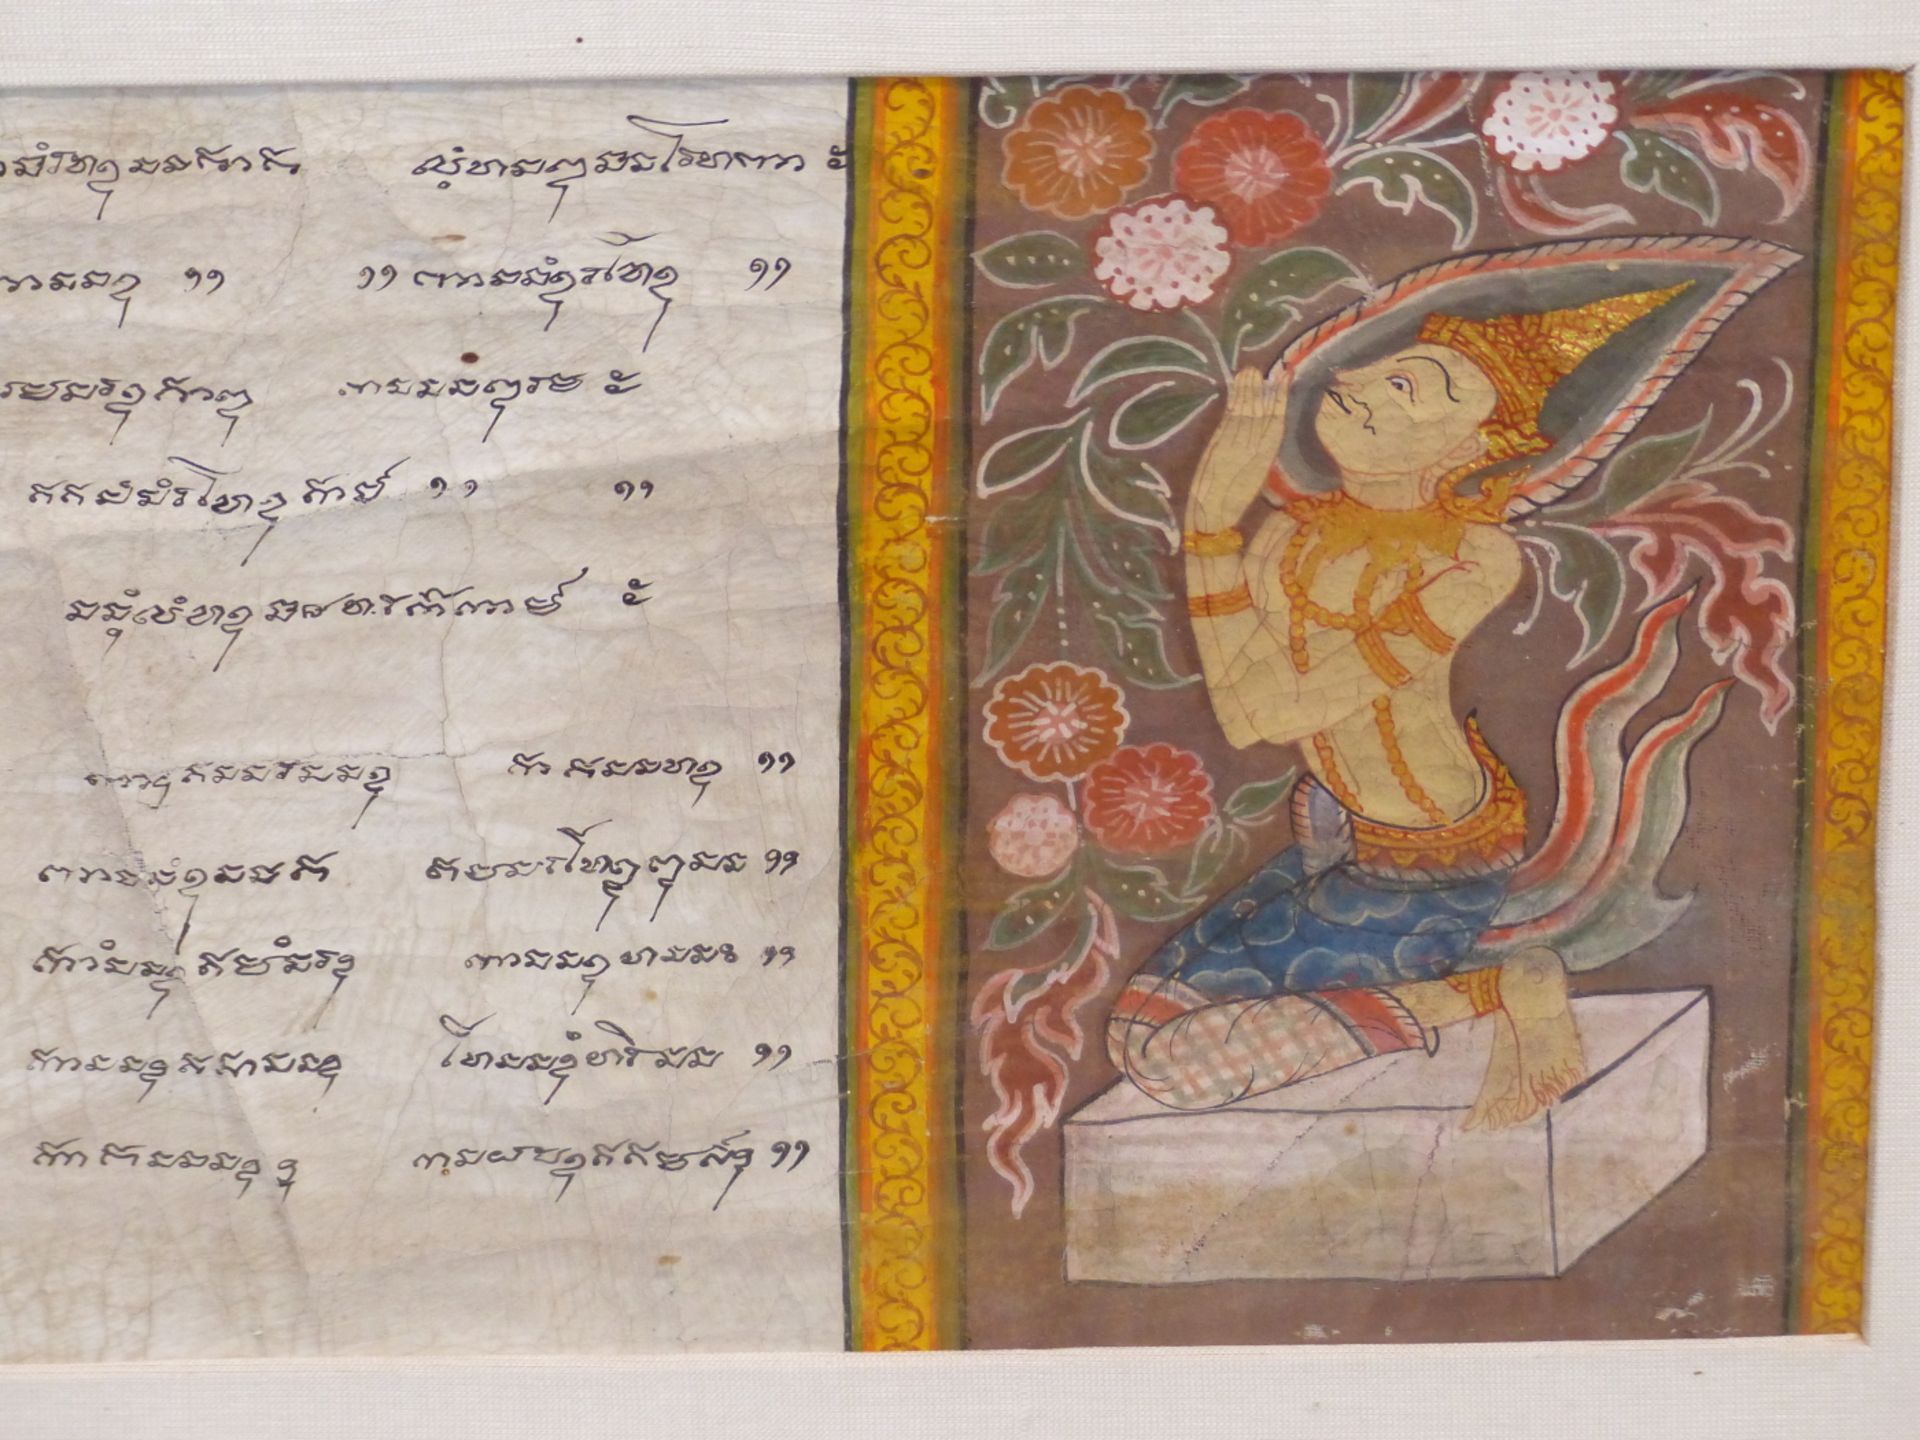 A 19th C. MALAYSIAN MANUSCRIPT FLANKED BY PAINTINGS OF WORSHIPPING FIGURES KNEELING ON PLINTHS - Image 2 of 5